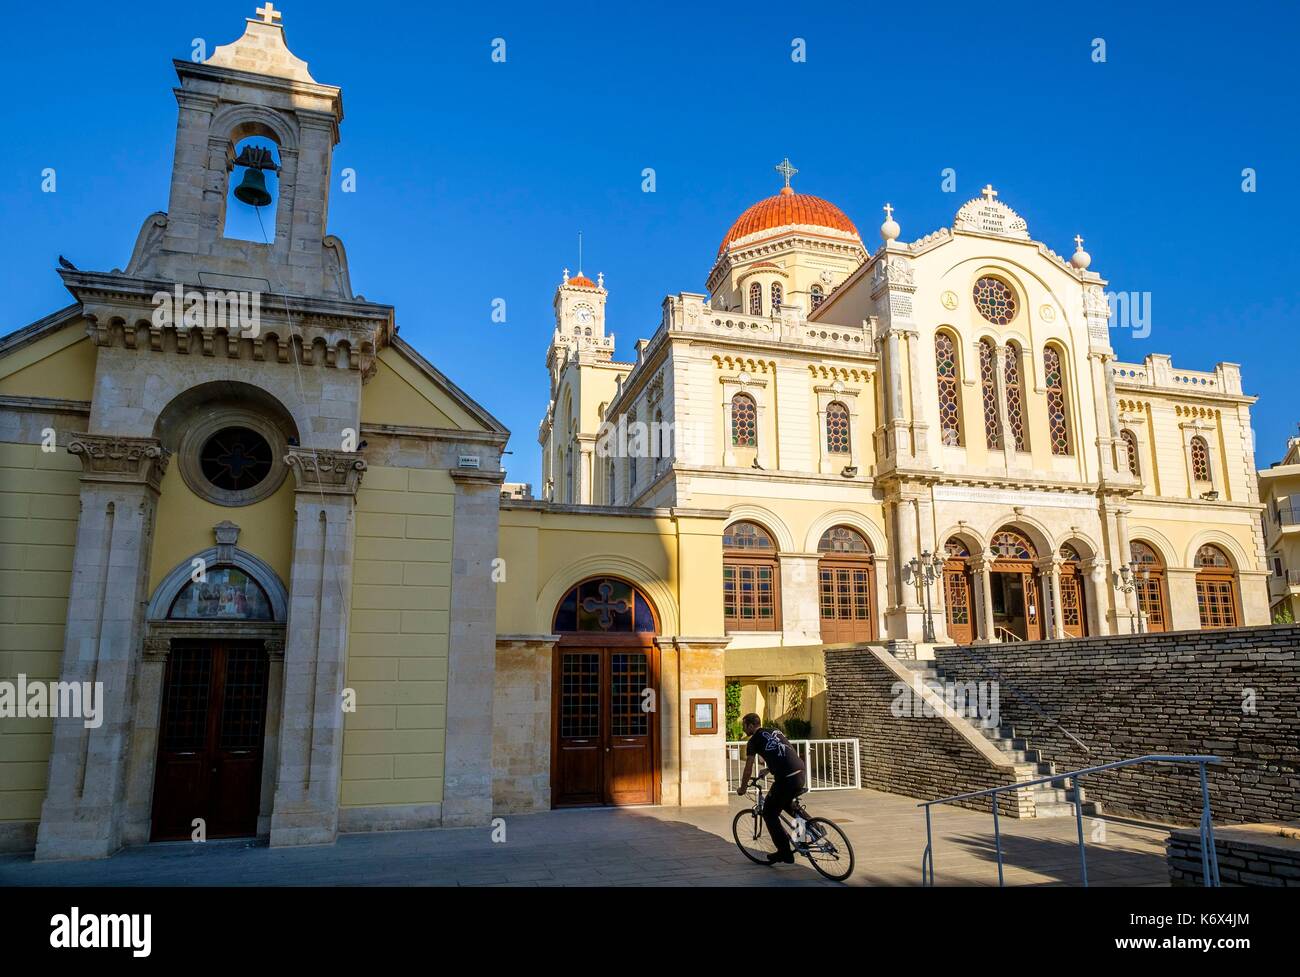 Greece, Crete, Heraklion, Agios Minas Cathedral built over the time period of 1862-1895 is one of the largest cathedrals in Greece, Agios Minas is the patron Saint of Heraklion Stock Photo